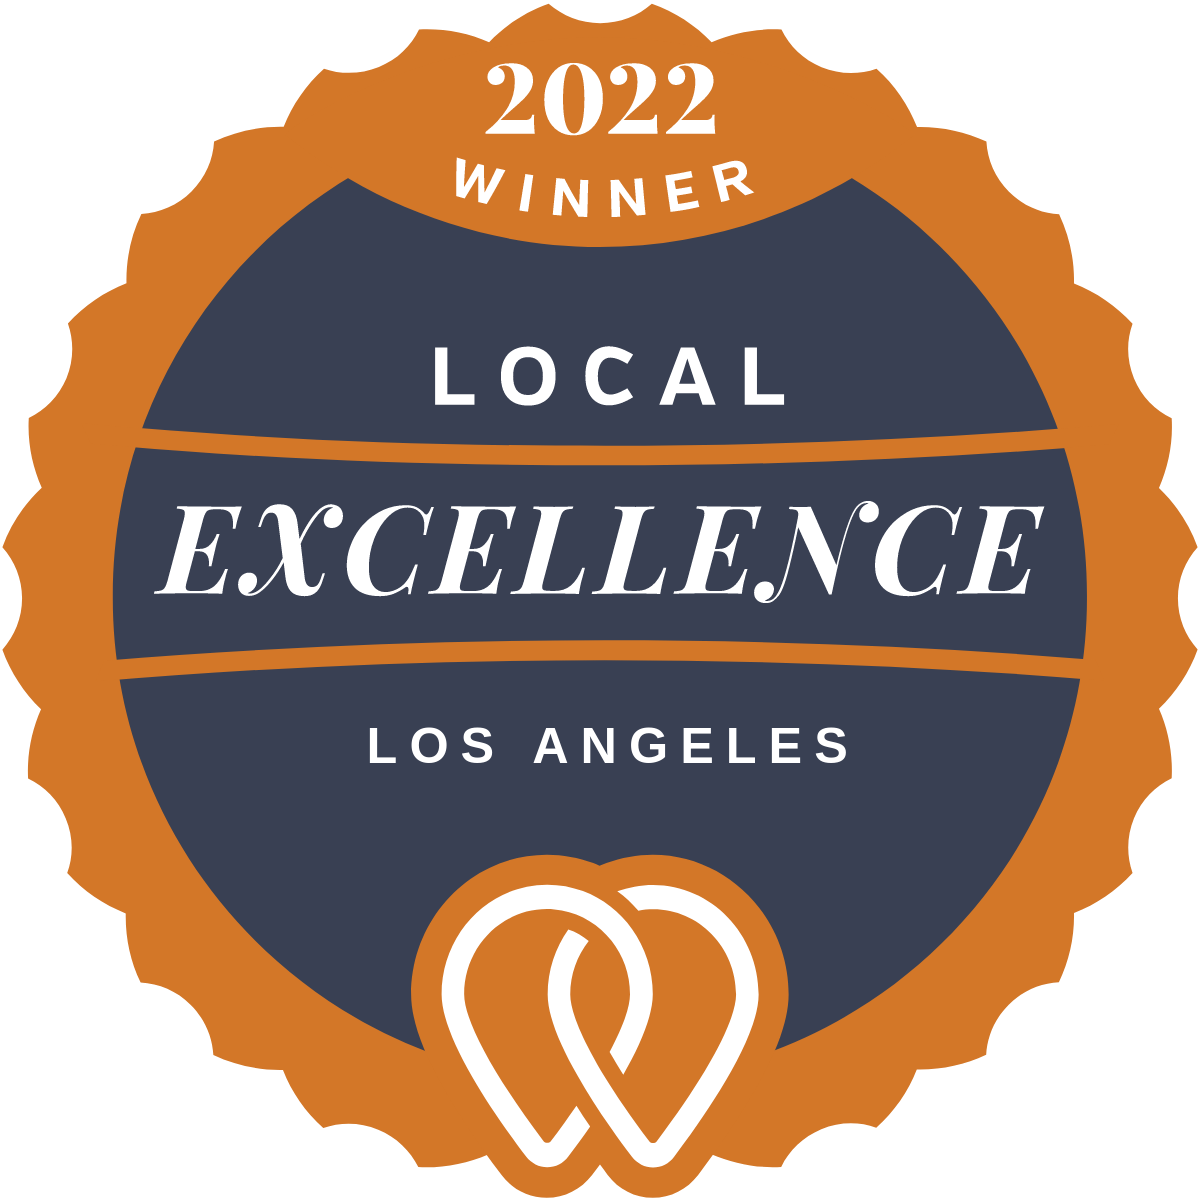 Upcity Local Excellence Winner for Los Angeles 2022